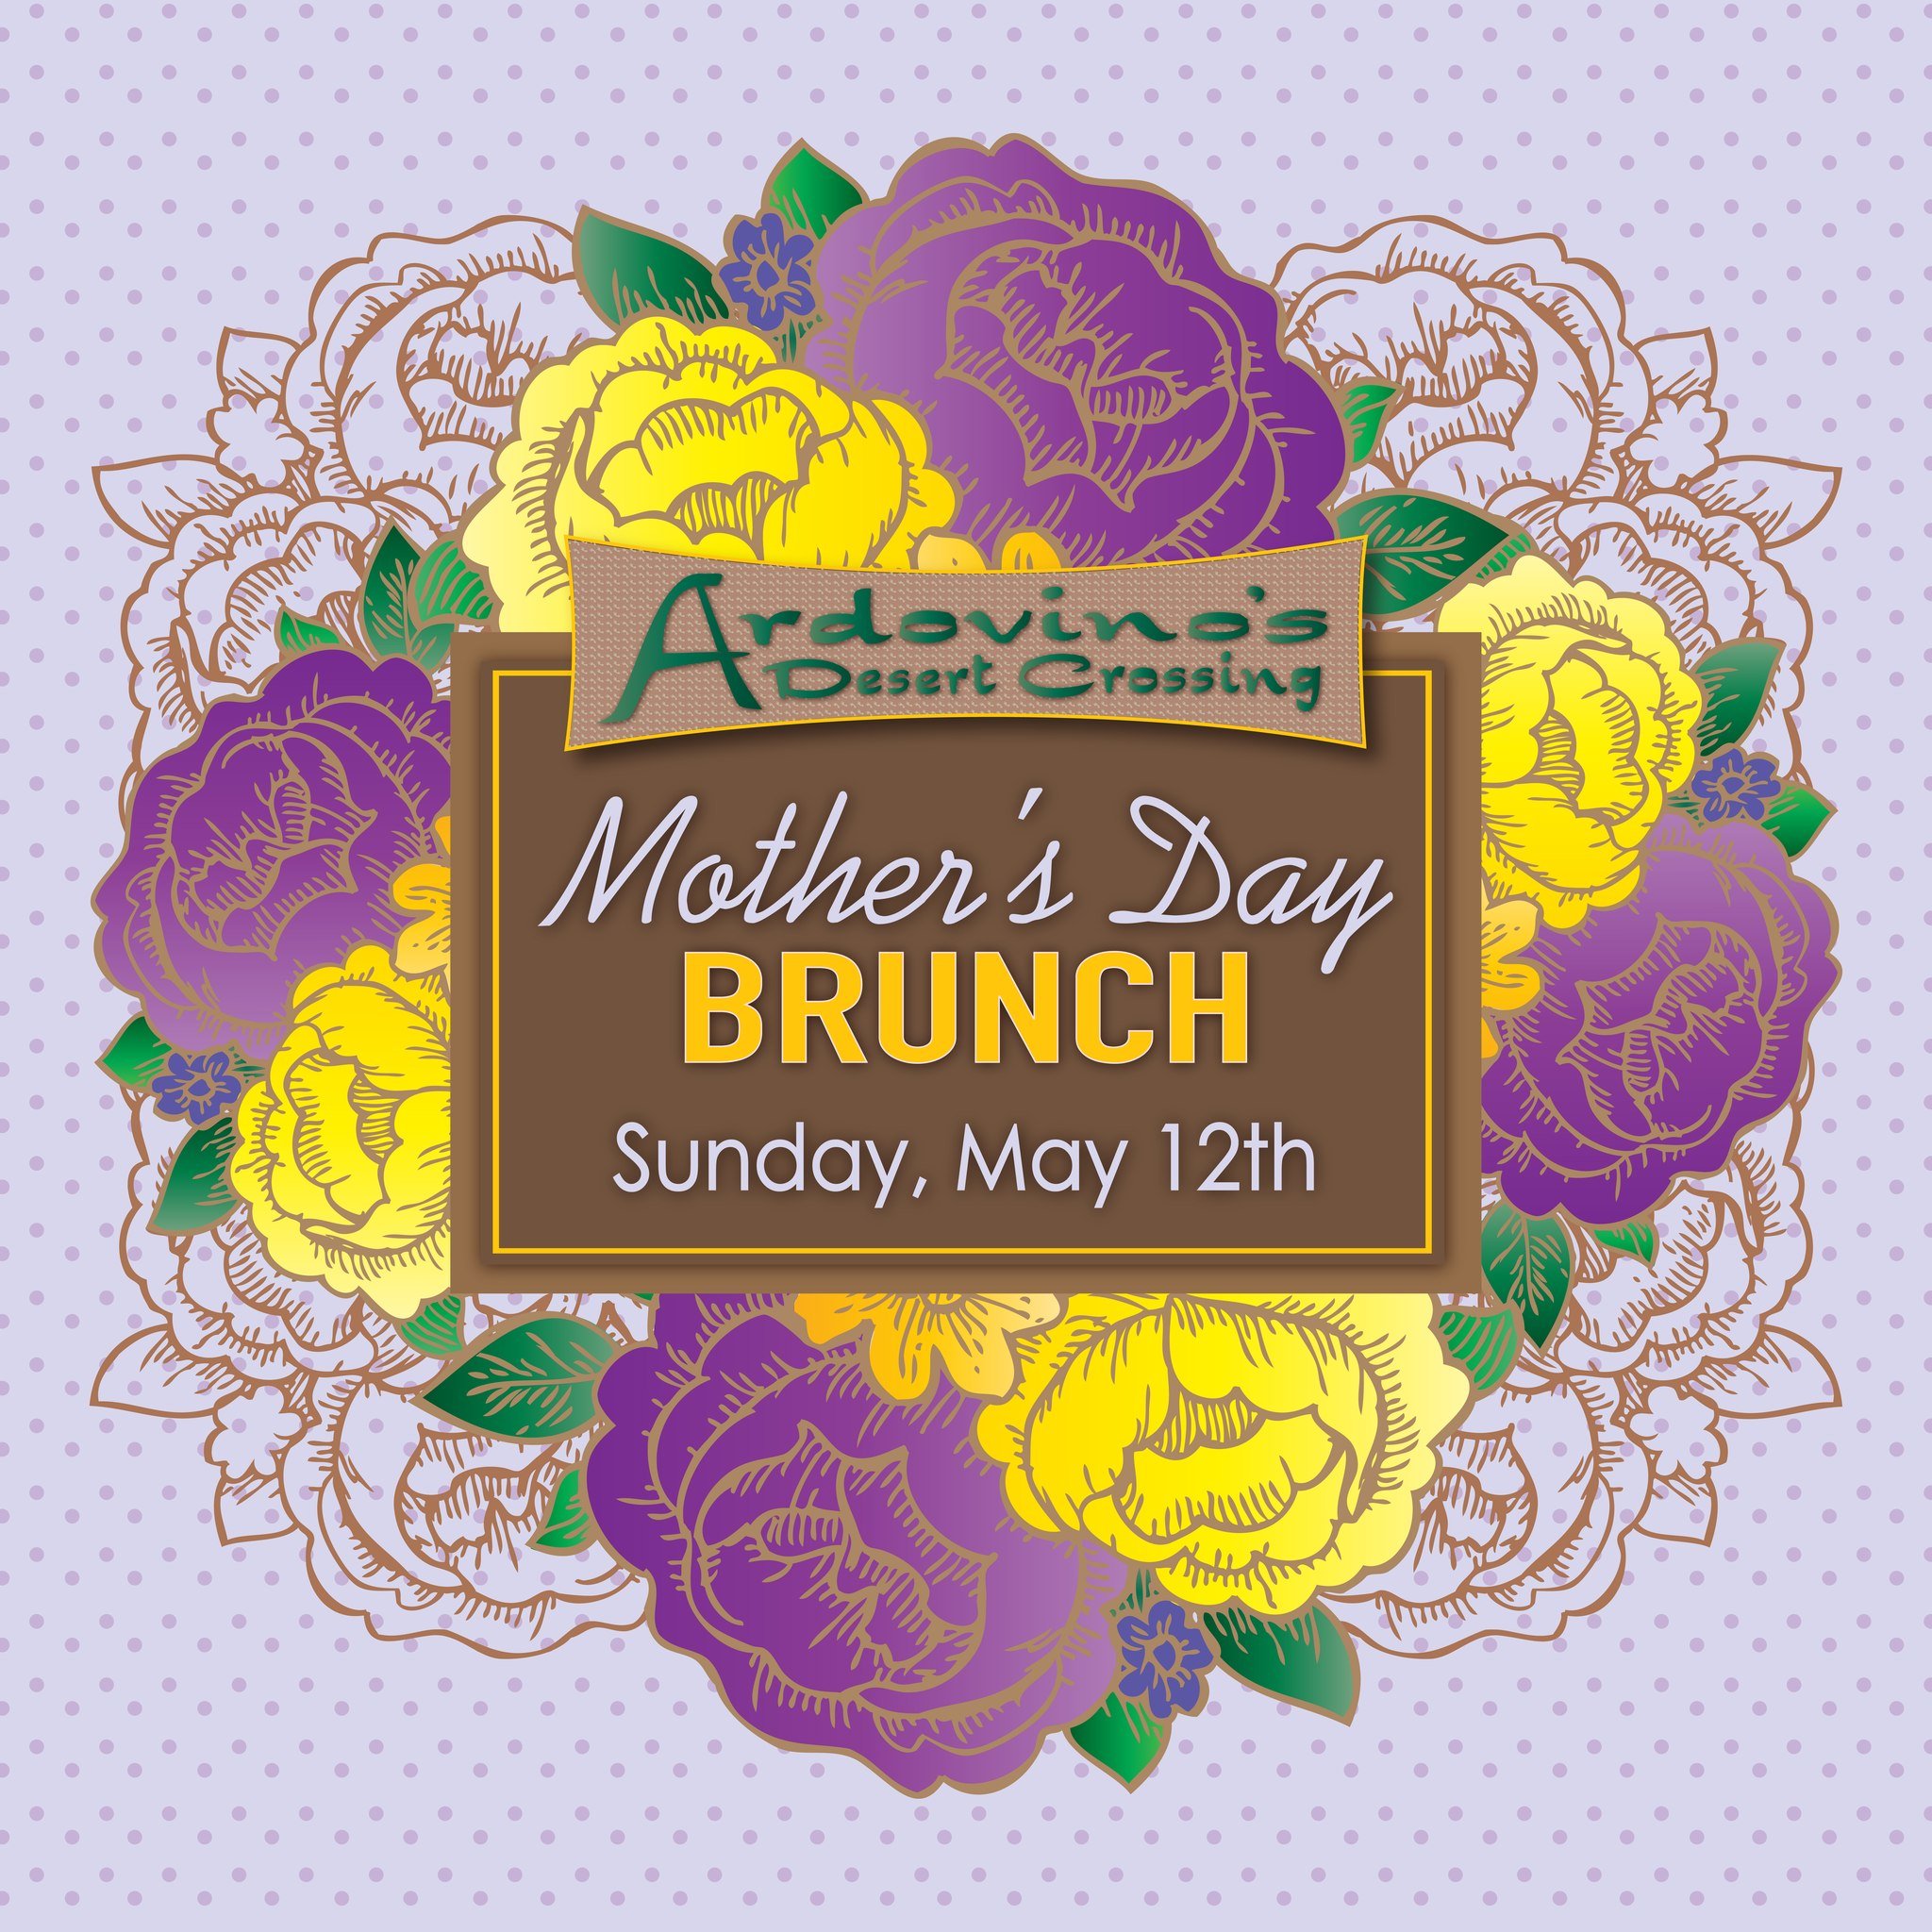 Have you made your Mother's Day Brunch reservation yet? Call 575-589-0653 ext. 6 today. First seating is at 9:30AM. 

www.ardovinos.com/mothers-day